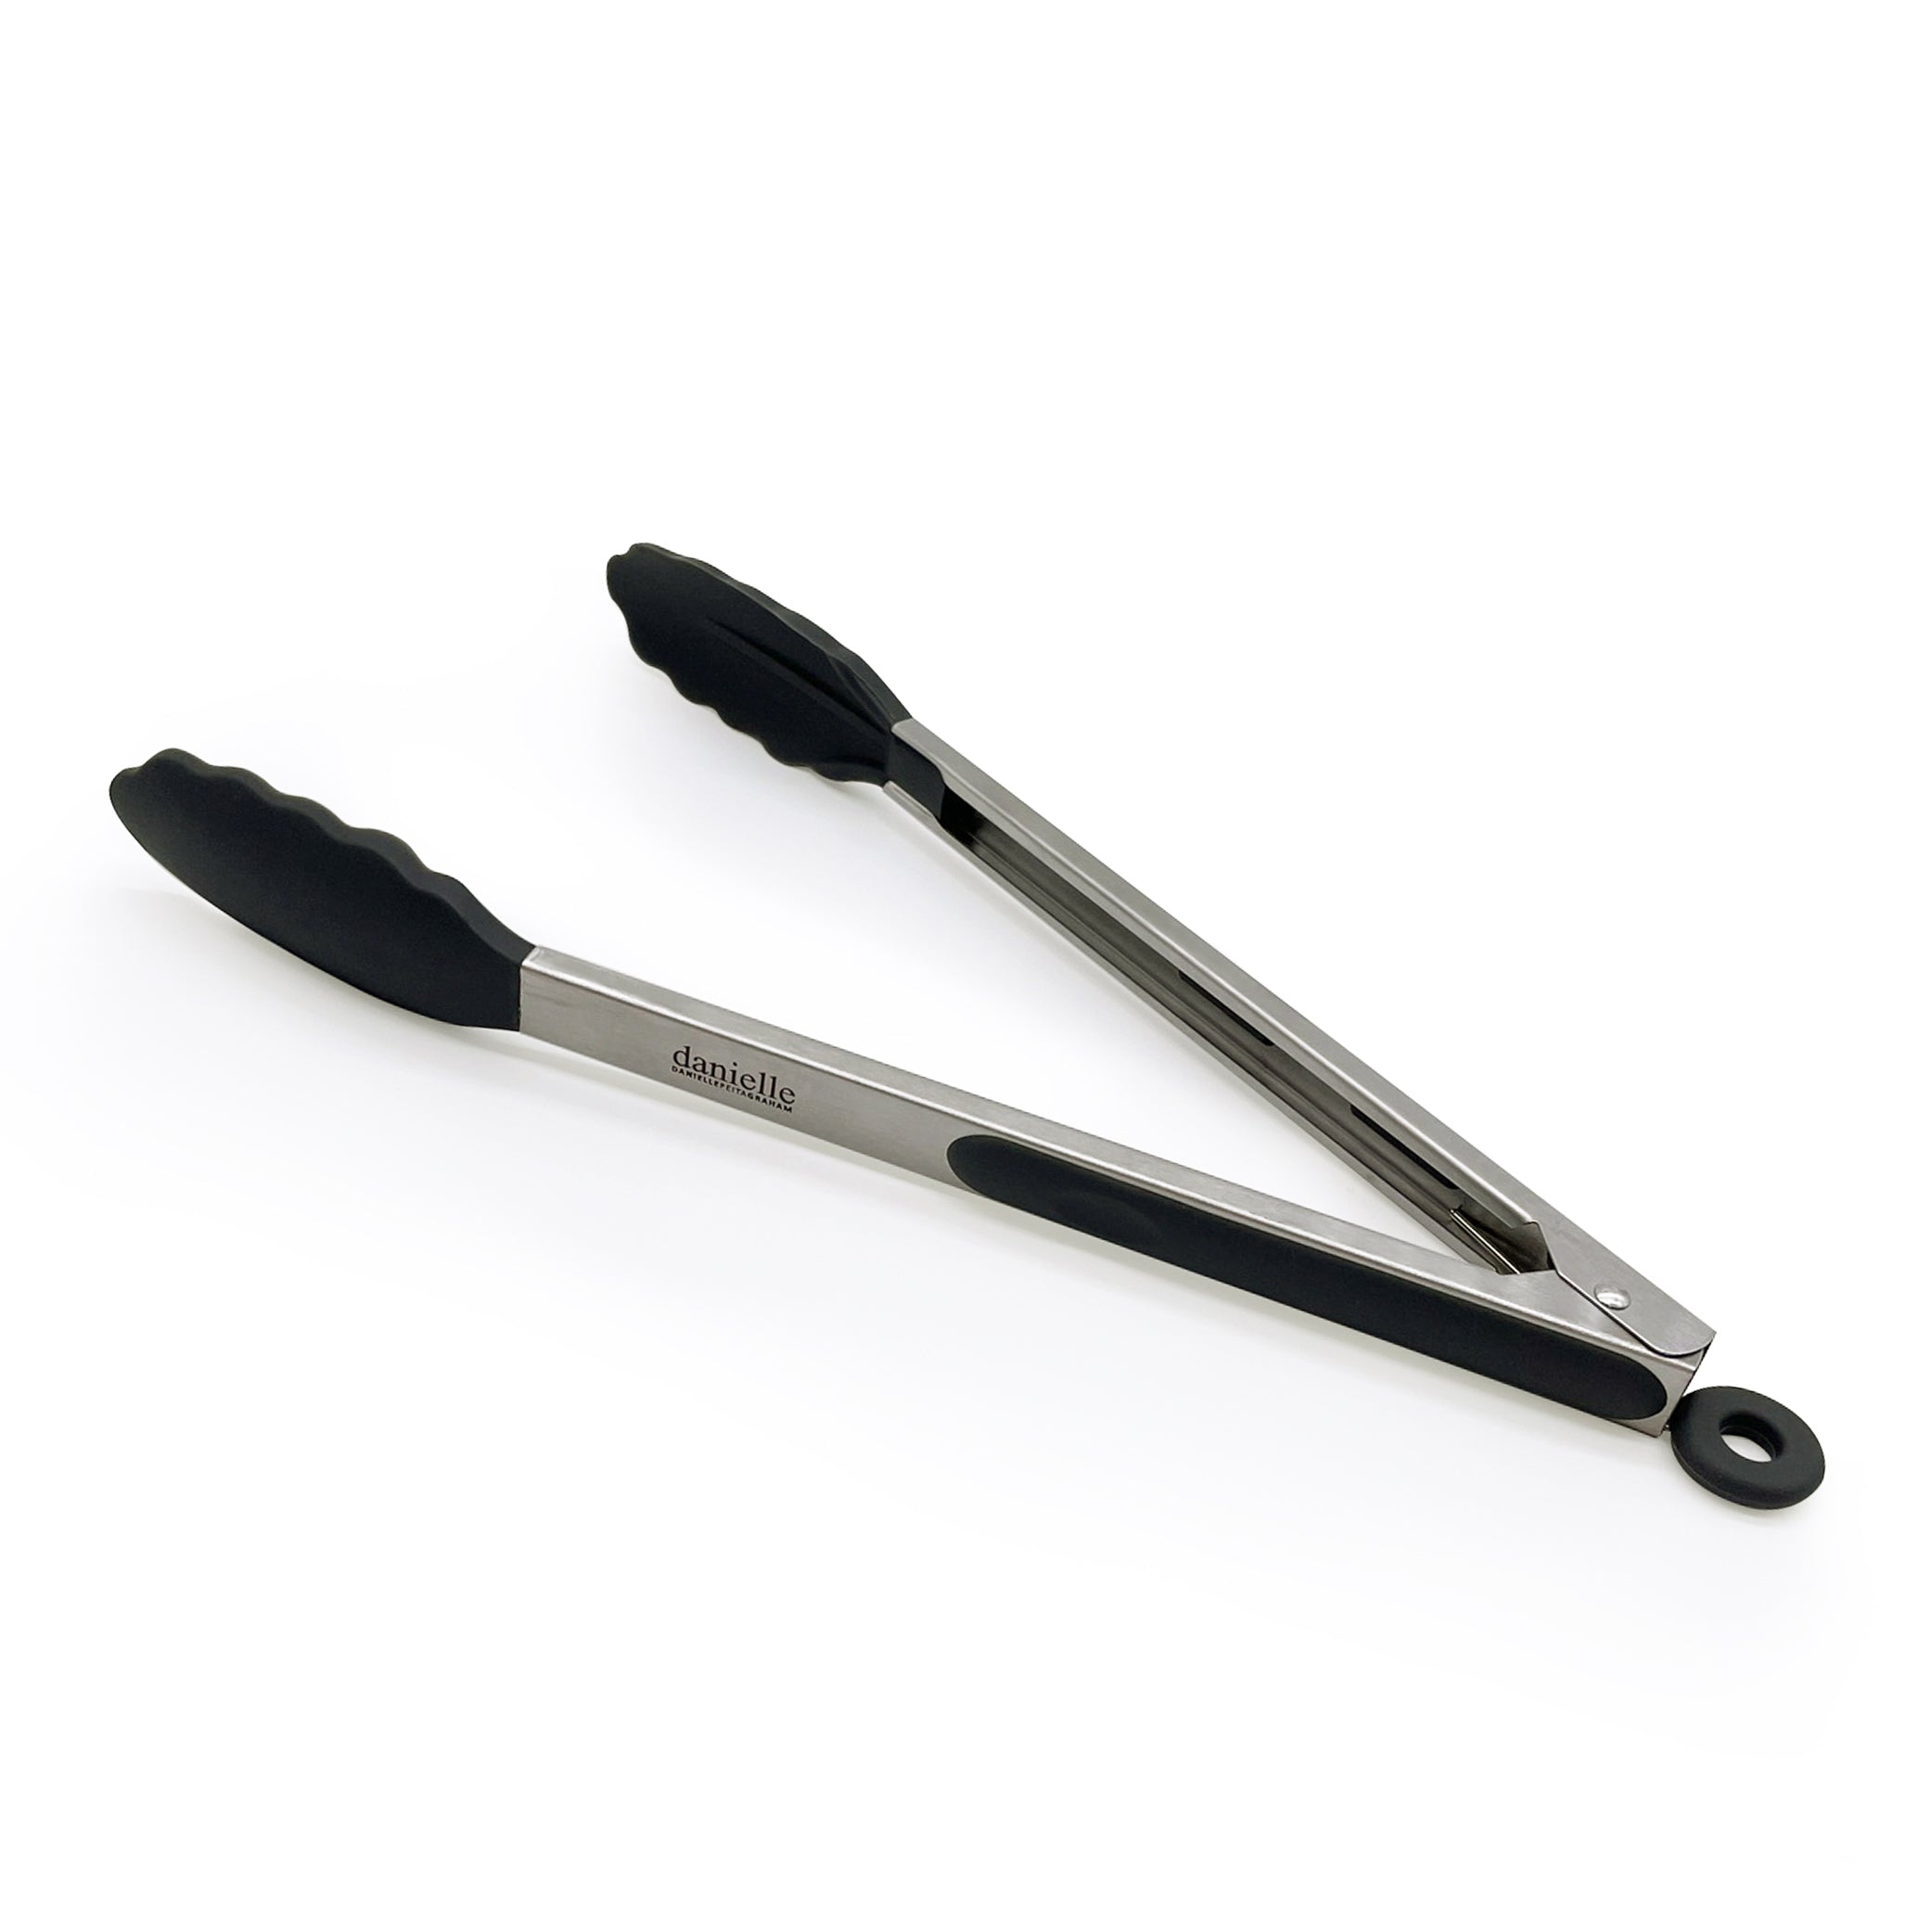 Essential Kitchen Utensils - Silicone Food Tongs (Large)